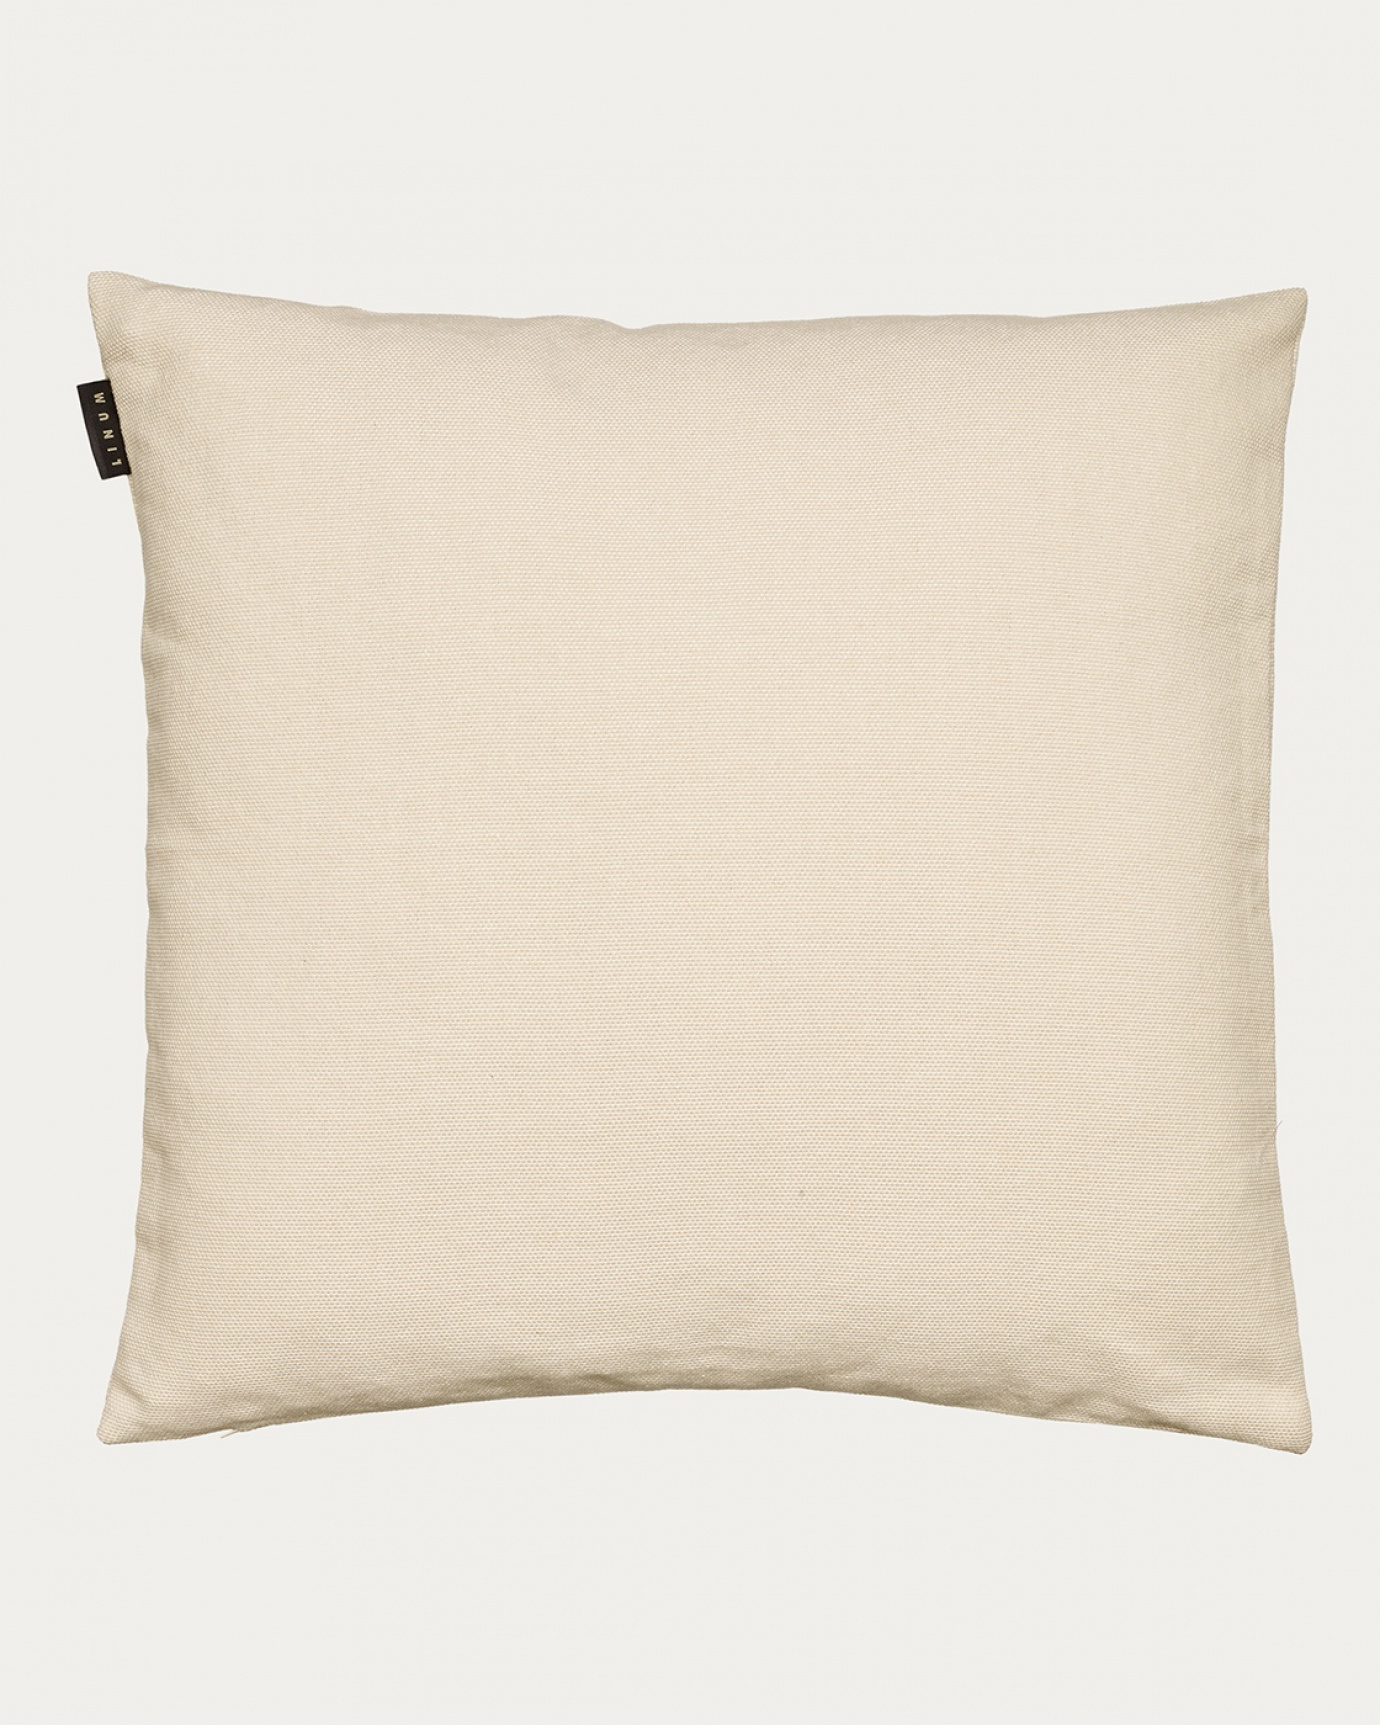 Product image creamy beige PEPPER cushion cover made of soft cotton from LINUM DESIGN. Easy to wash and durable for generations. Size 60x60 cm.